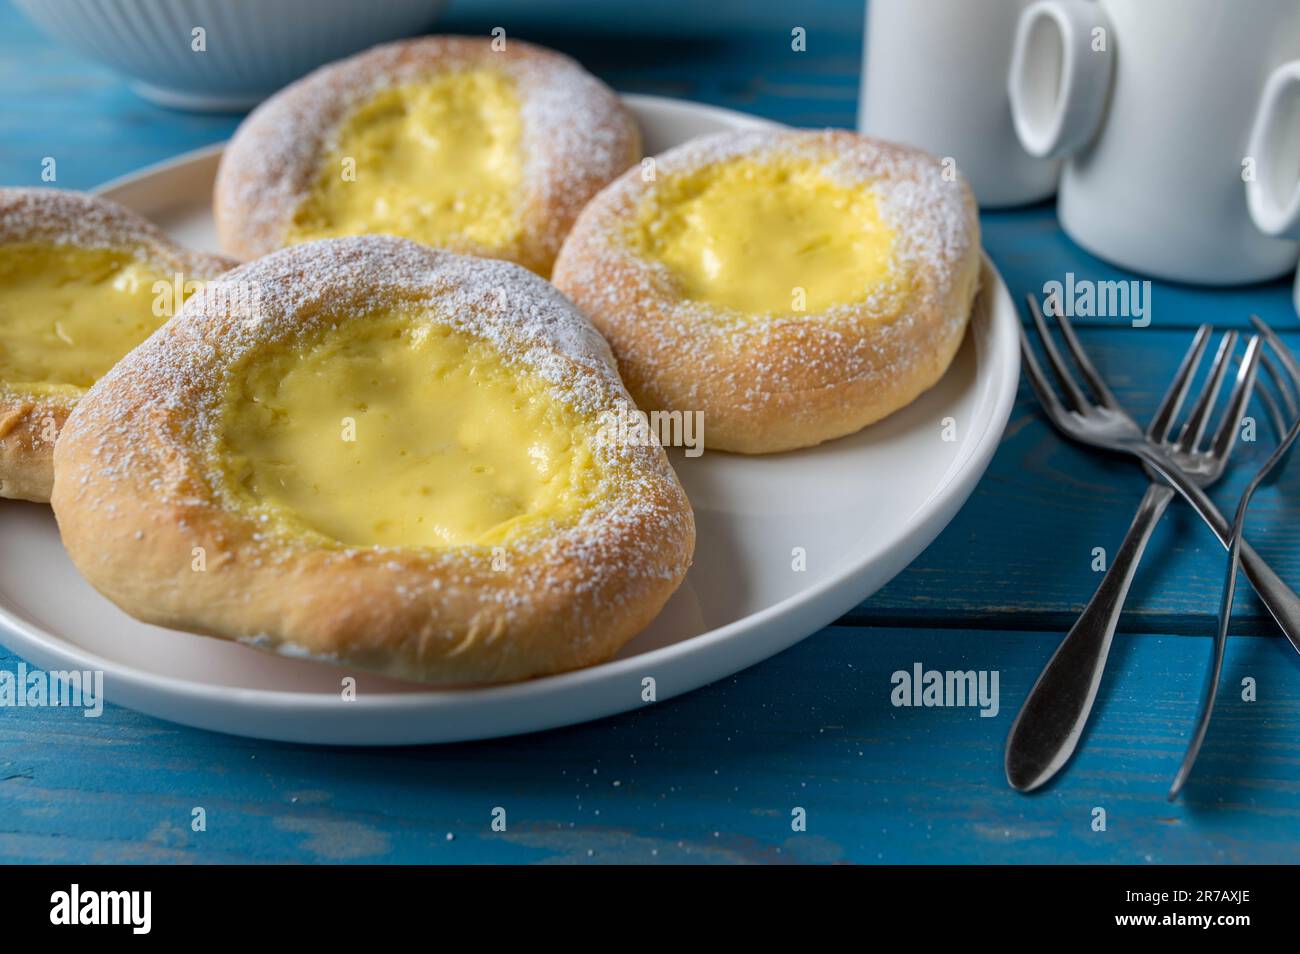 Yeast pastry with sour cream, pudding filling Stock Photo